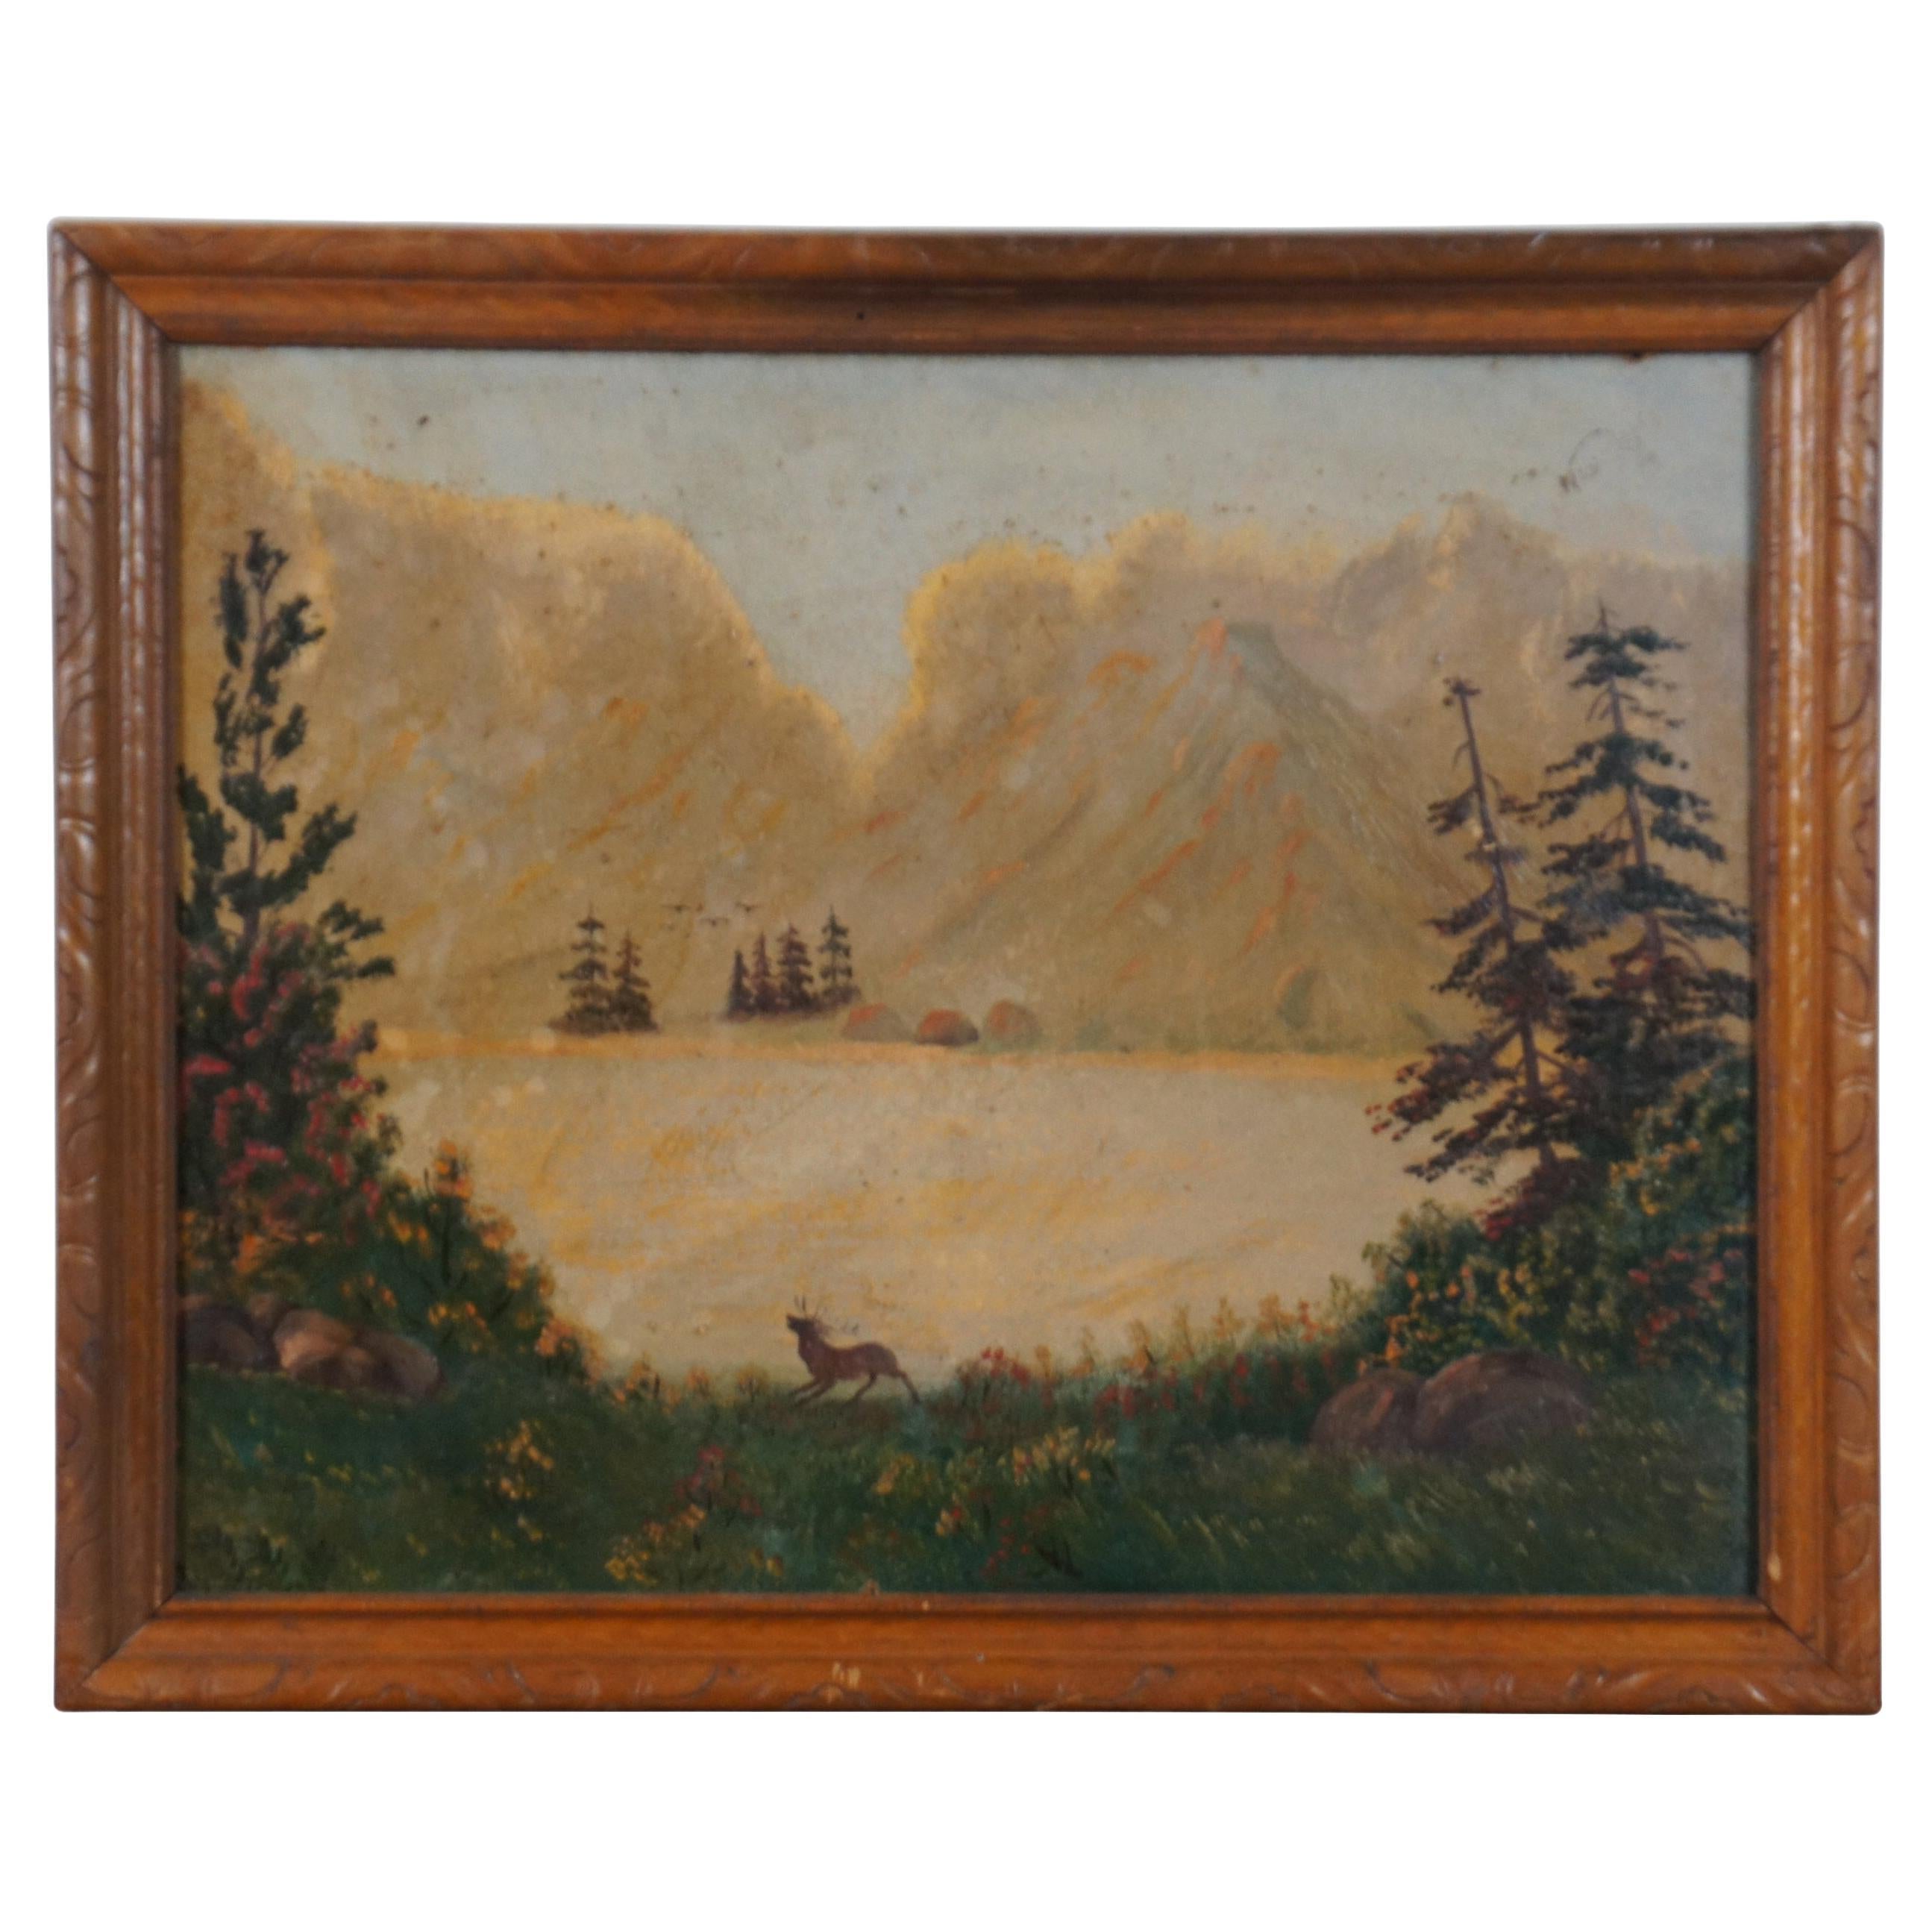 1949, Nan Rogers Oil Painting on Board Stag Buck Mountain Lake Landscape